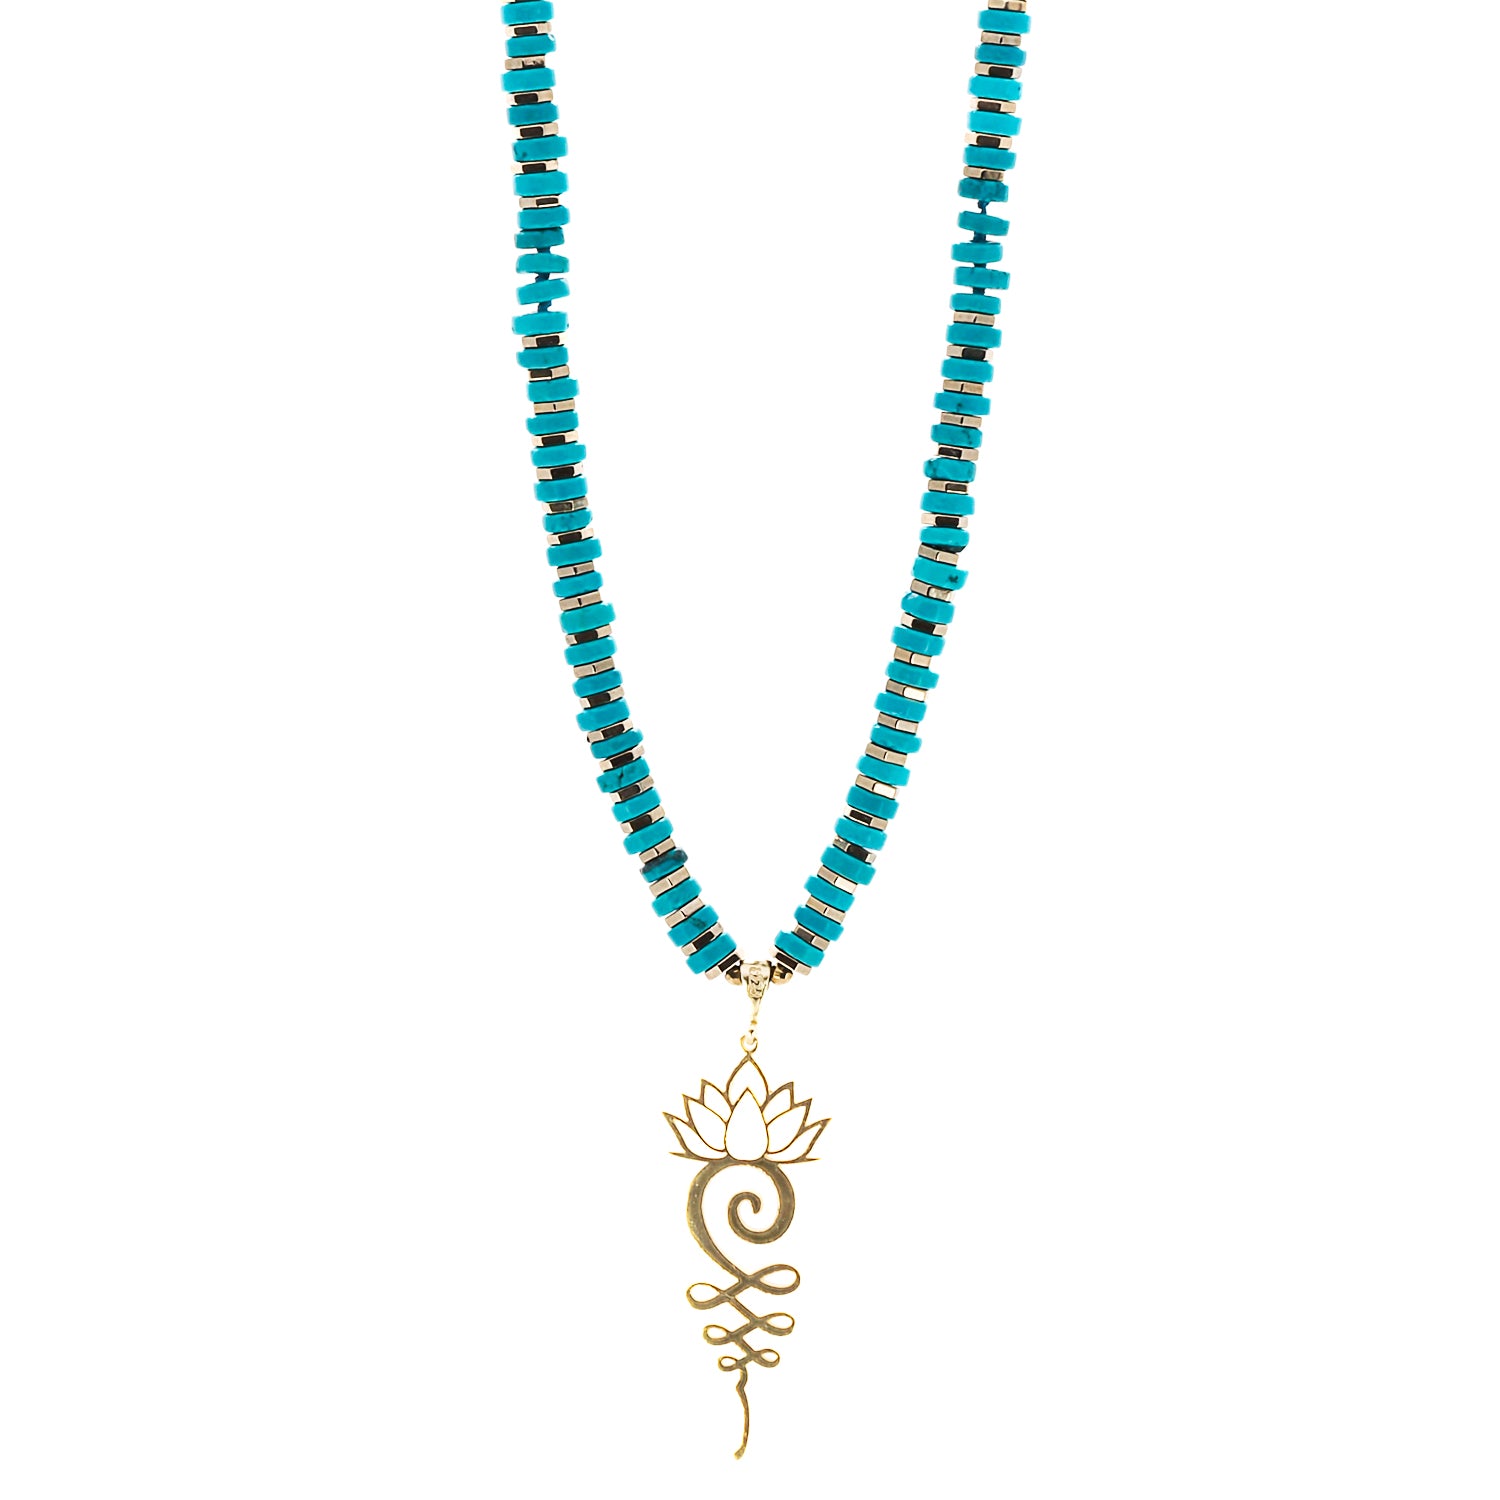 A close-up of the Turquoise Unalome Serenity Necklace, highlighting its intricate Unalome symbol